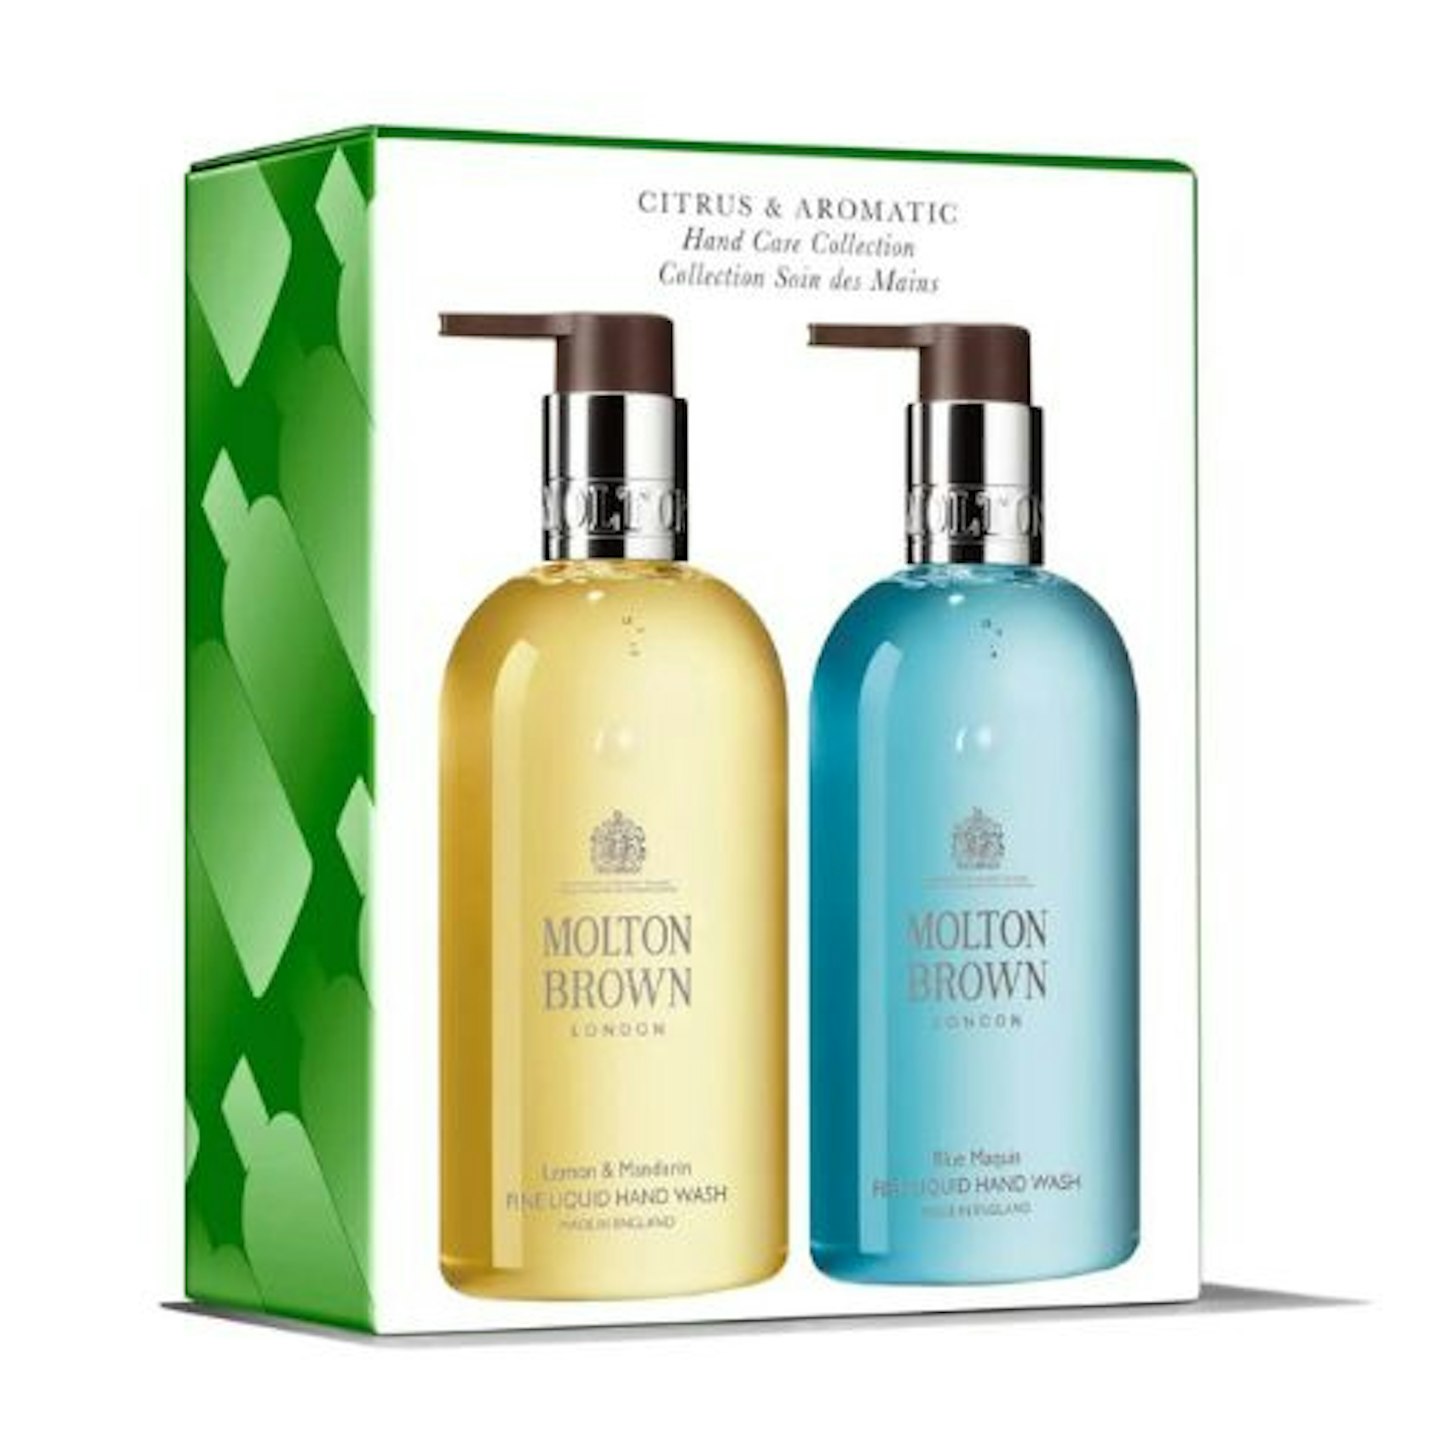 Molton Brown Citrus and Aromatic Hand Care Gift Set